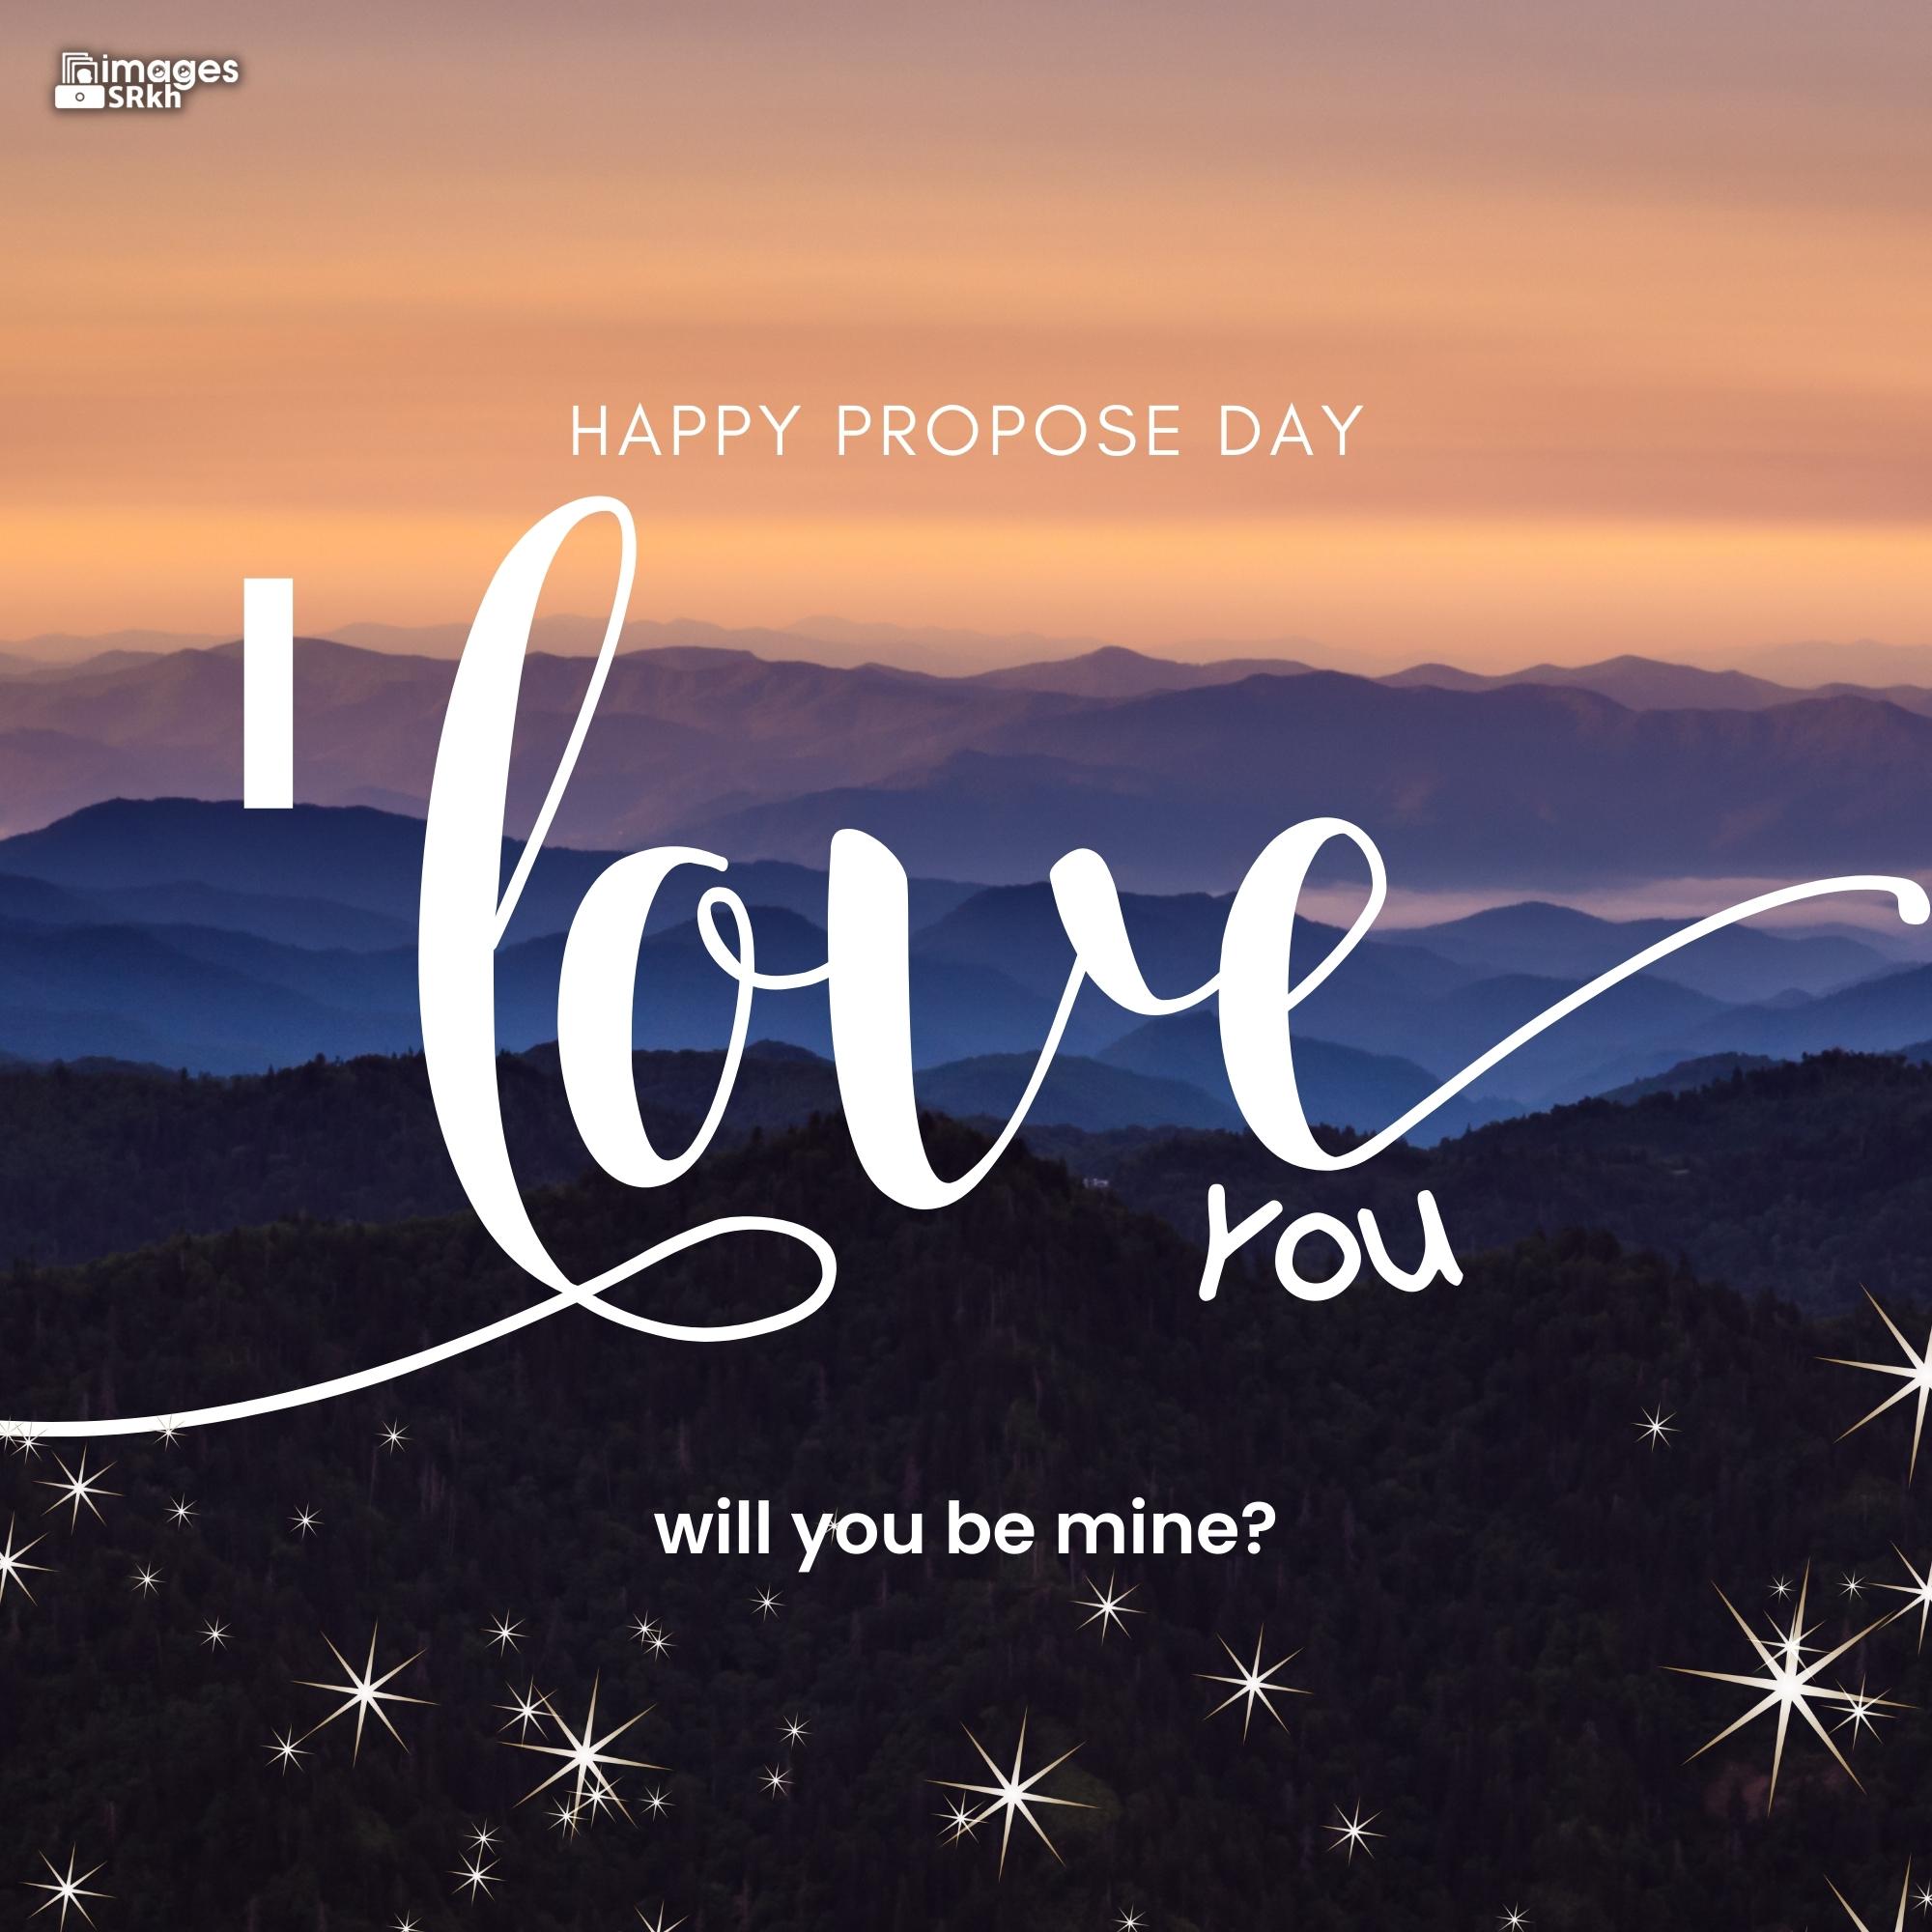 Happy Propose Day Images | 428 | I love you will you be mine